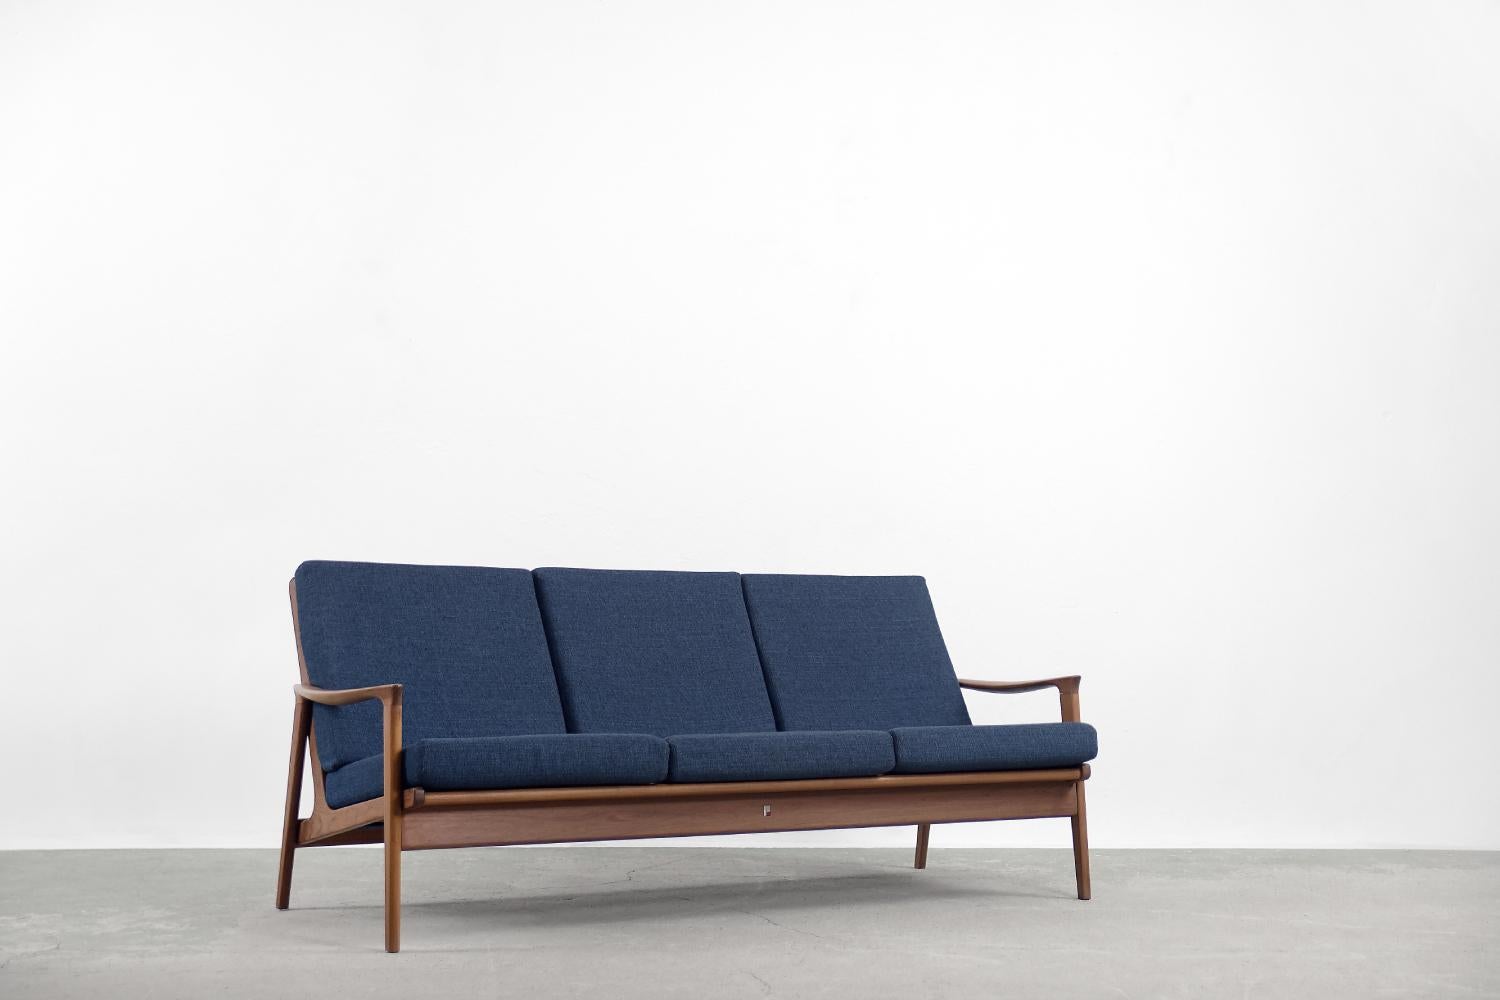 This impressive set of sofa and two armchairs was designed and produced by the Australian company Parker Furniture in 1956. Parker has a legacy of creating some of the finest Mid-Century furniture. These eco-friendly seats are no exception. In an